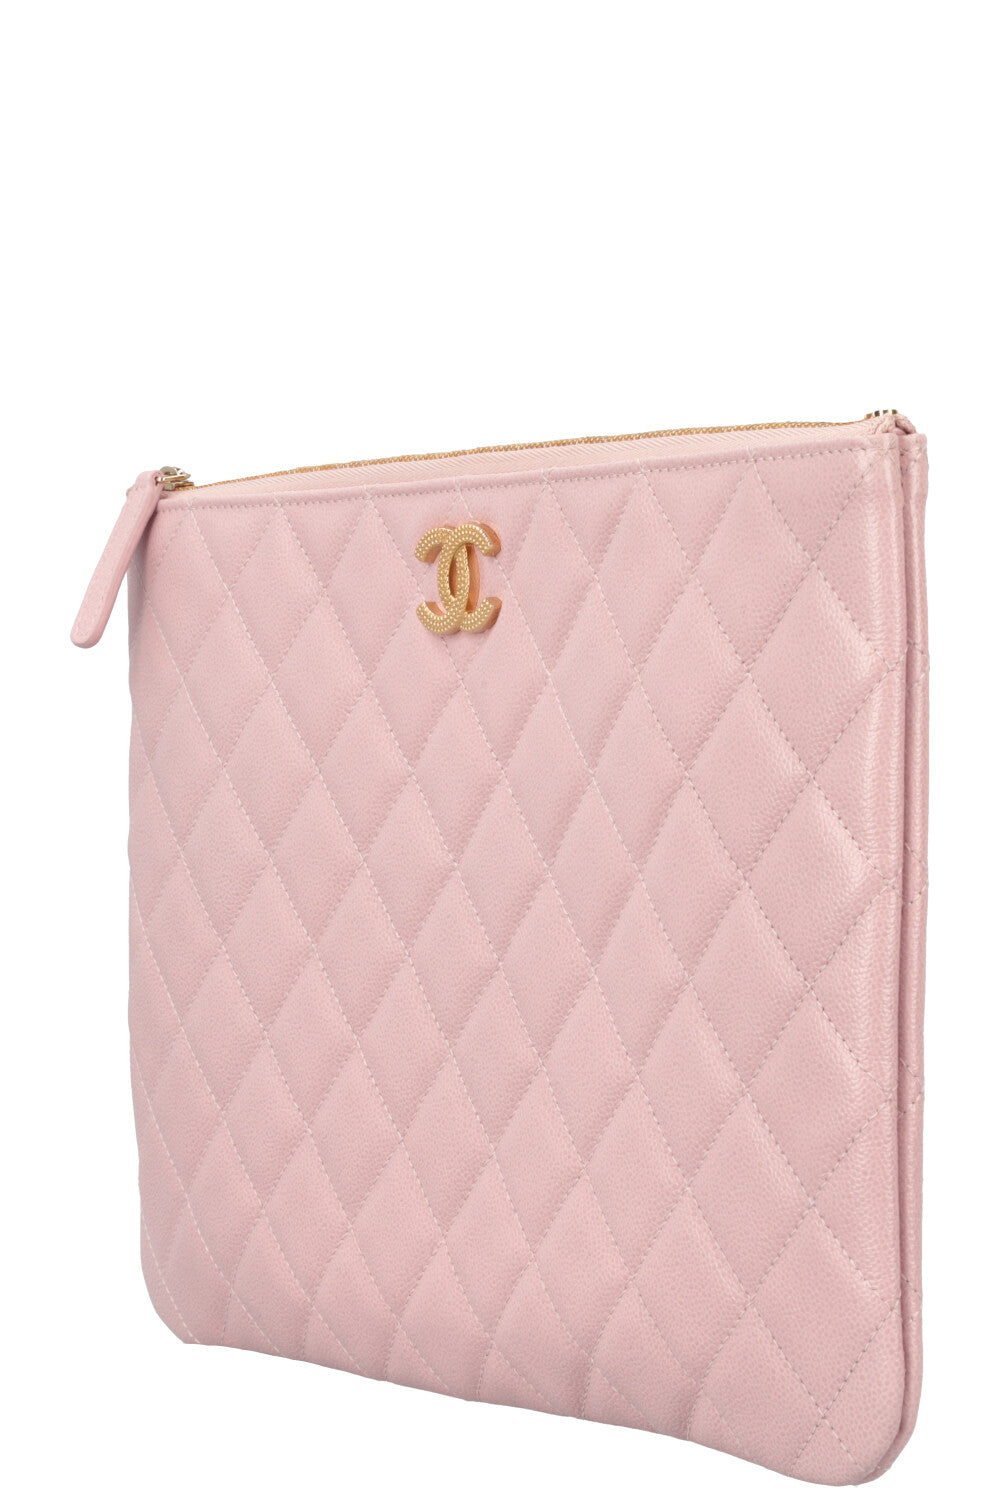 CHANEL CC Pouch Caviar Leather Pink